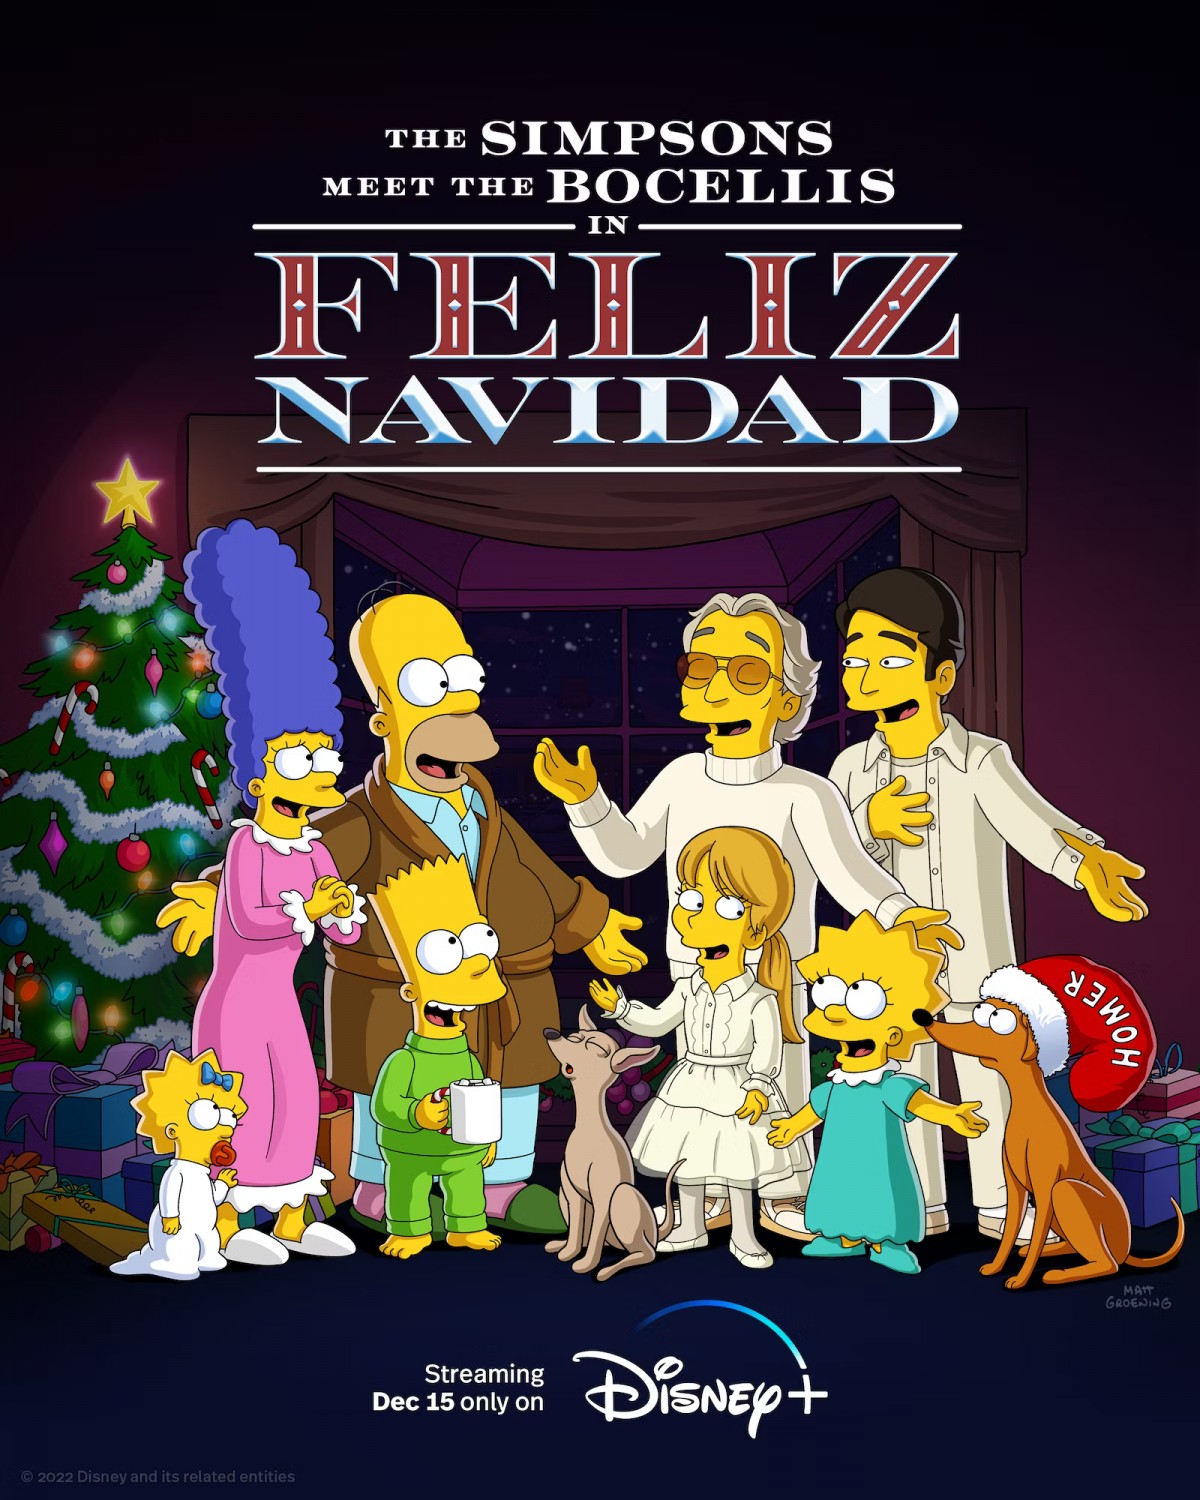 Extra Large Movie Poster Image for The Simpsons meet the Bocellis in 'Feliz Navidad'